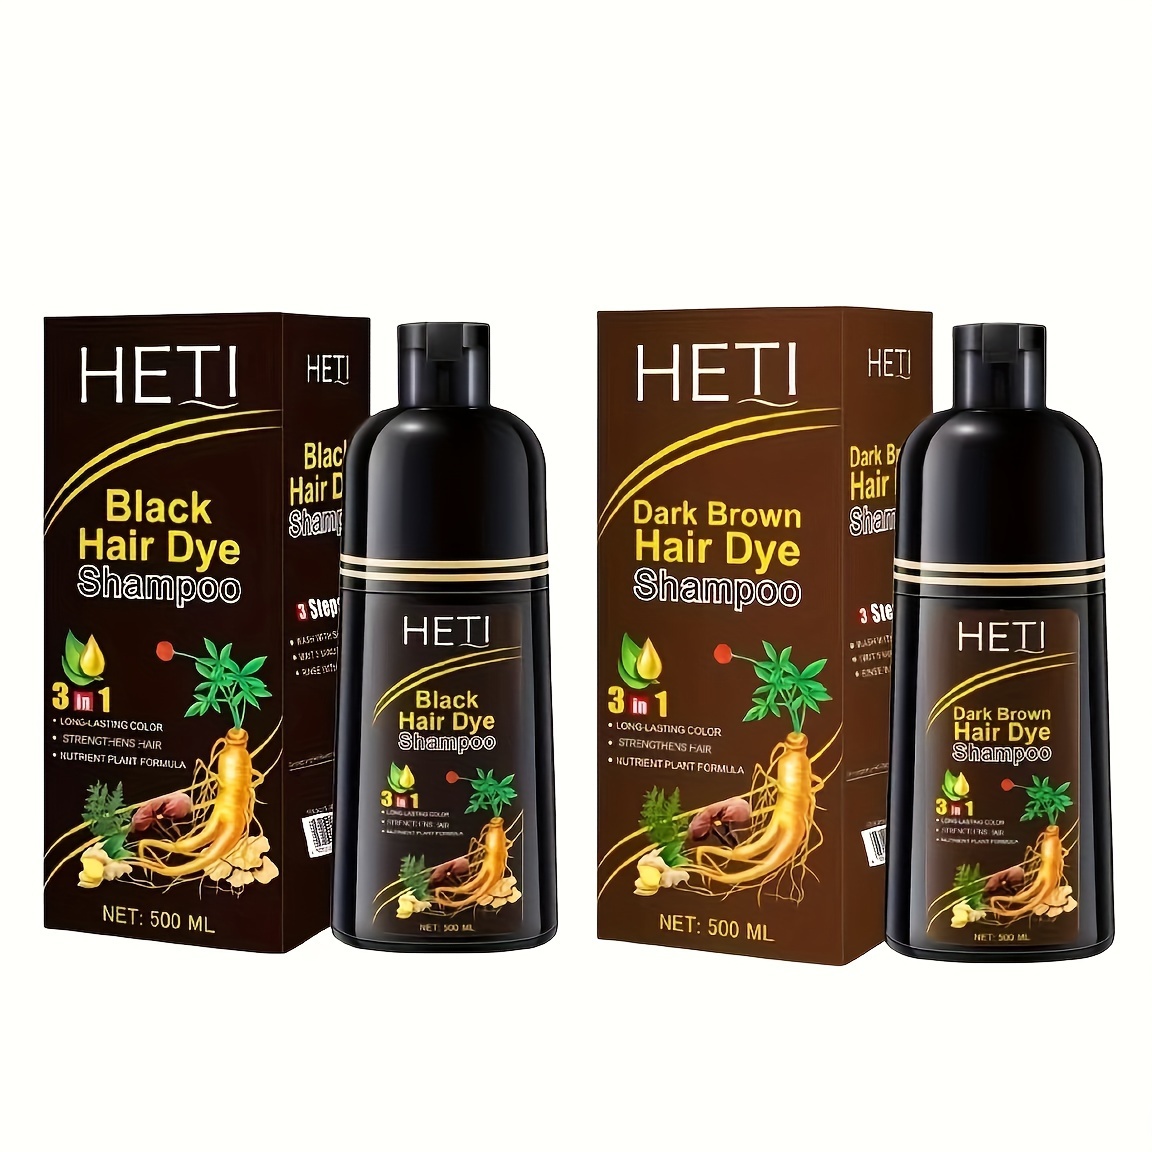 

500ml Ginseng Hair Color Shampoo, Convenient And Fast Coloring, Instant Hair Dye Shampooo For All Hair Types